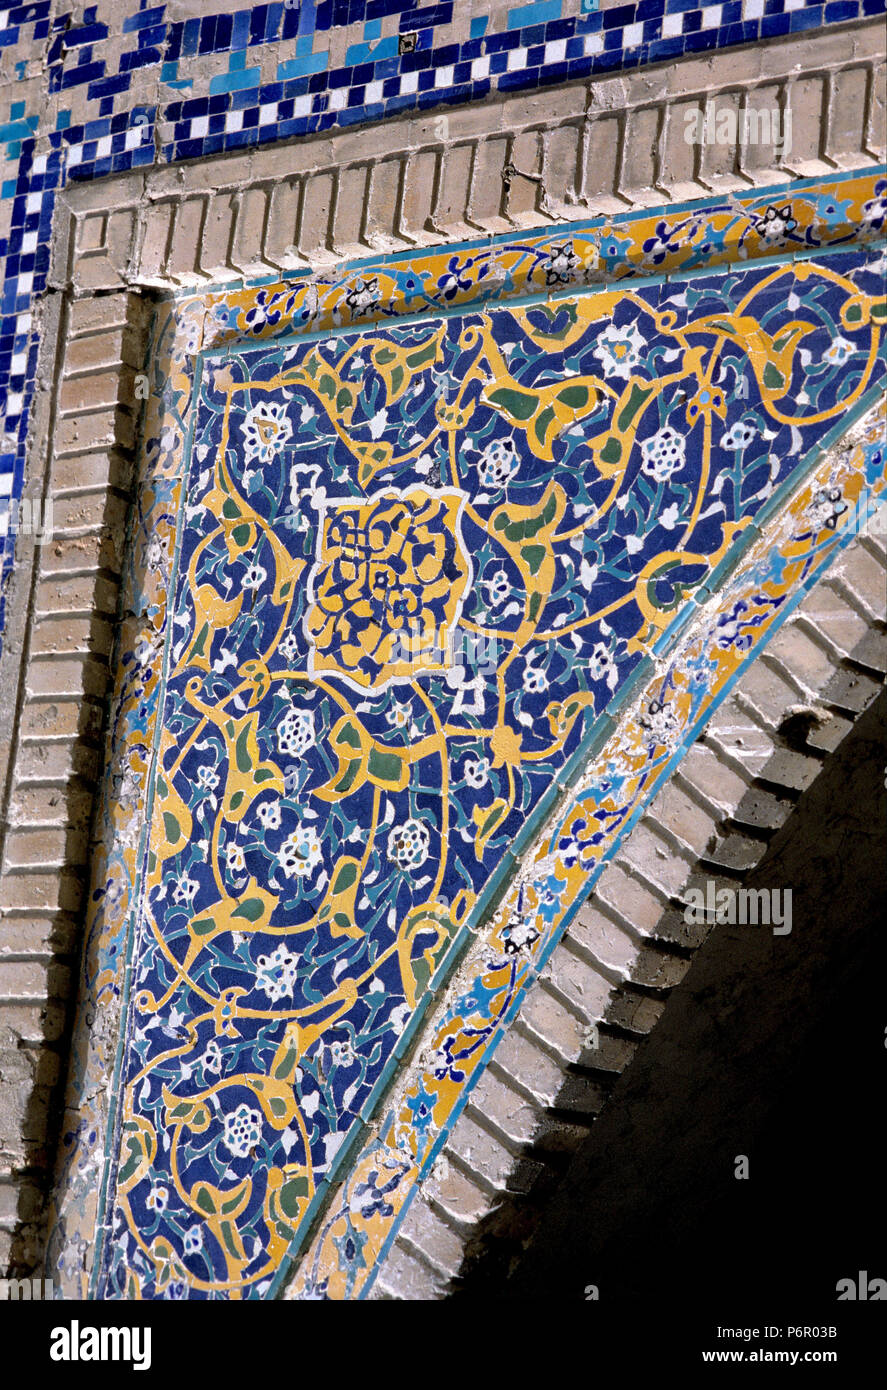 Detail of a madrasah goal arch decorated with faience and mosaics in Bukhara, undated photograph from October 1992. The historical, mostly Islamic center of Bukhara was declared a UNESCO World Heritage Site in 1993, and the state of Uzbekistan gained its independence after the collapse of the Soviet Union on 01.09.1991. Photo: Matthias Toedt / dpa central image / ZB / picture alliance | usage worldwide Stock Photo